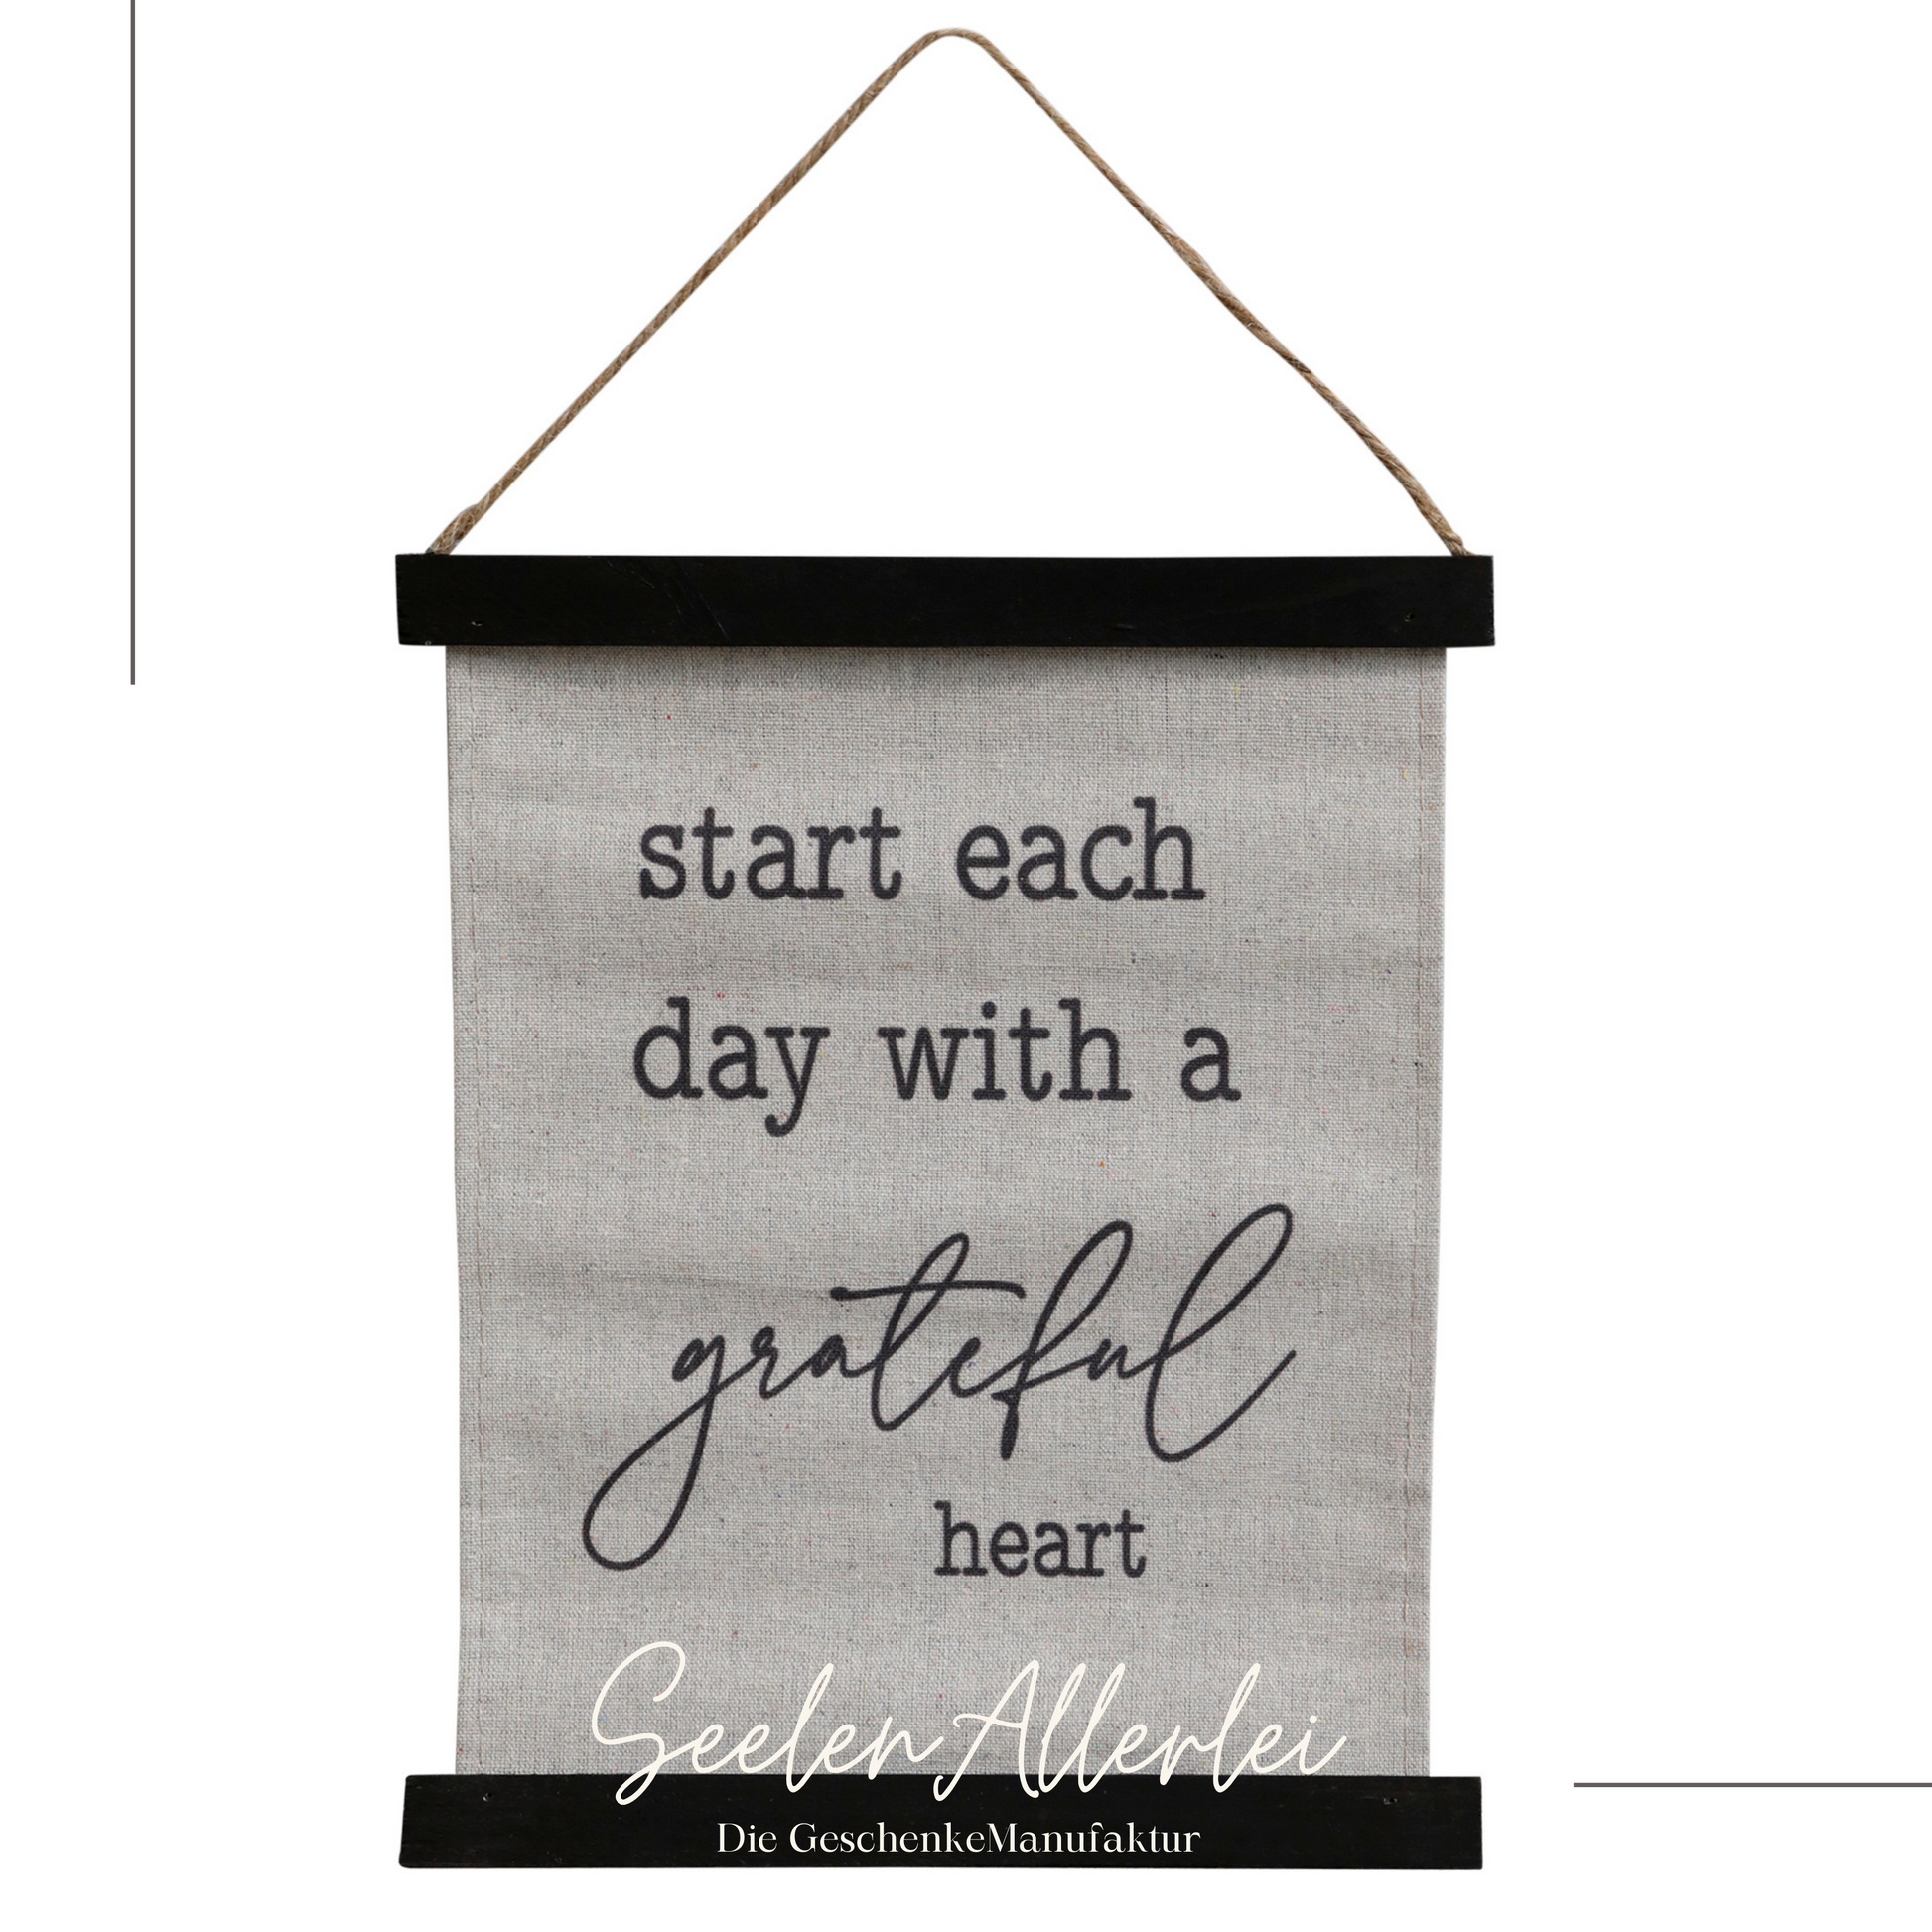 start each day with a grateful heart